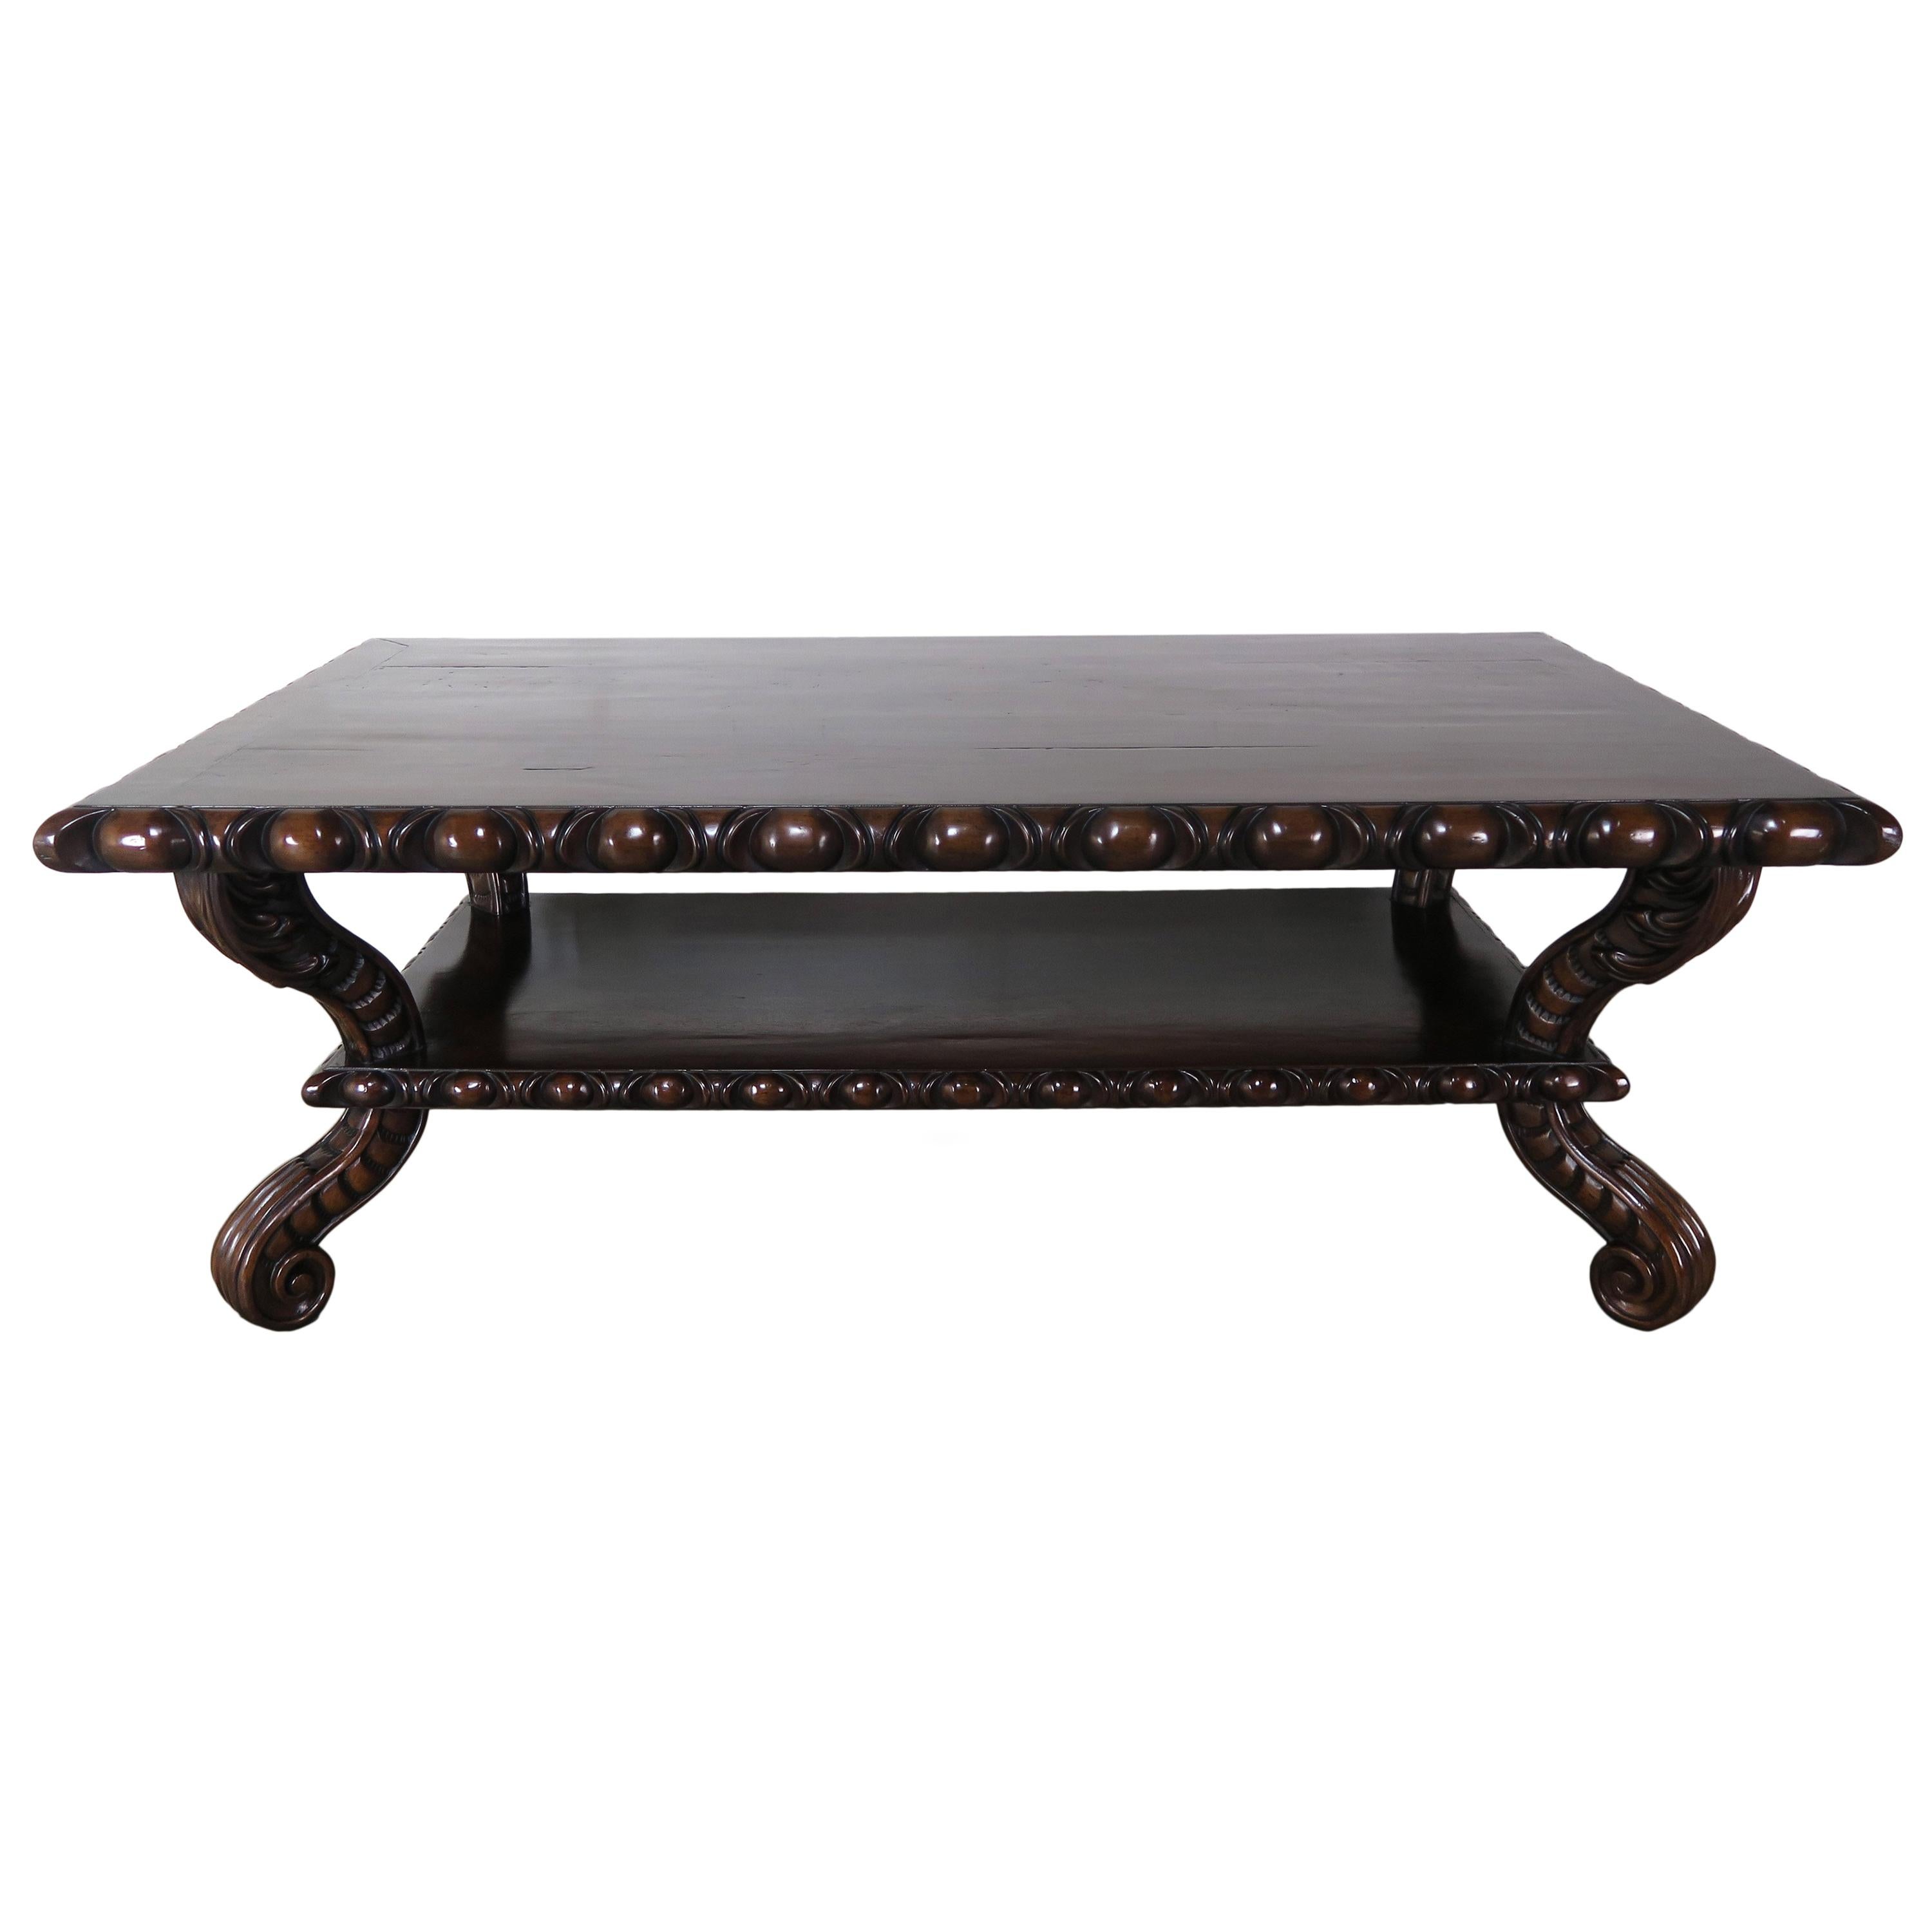 Heavily Carved Rectangular Shaped Walnut Coffee Table